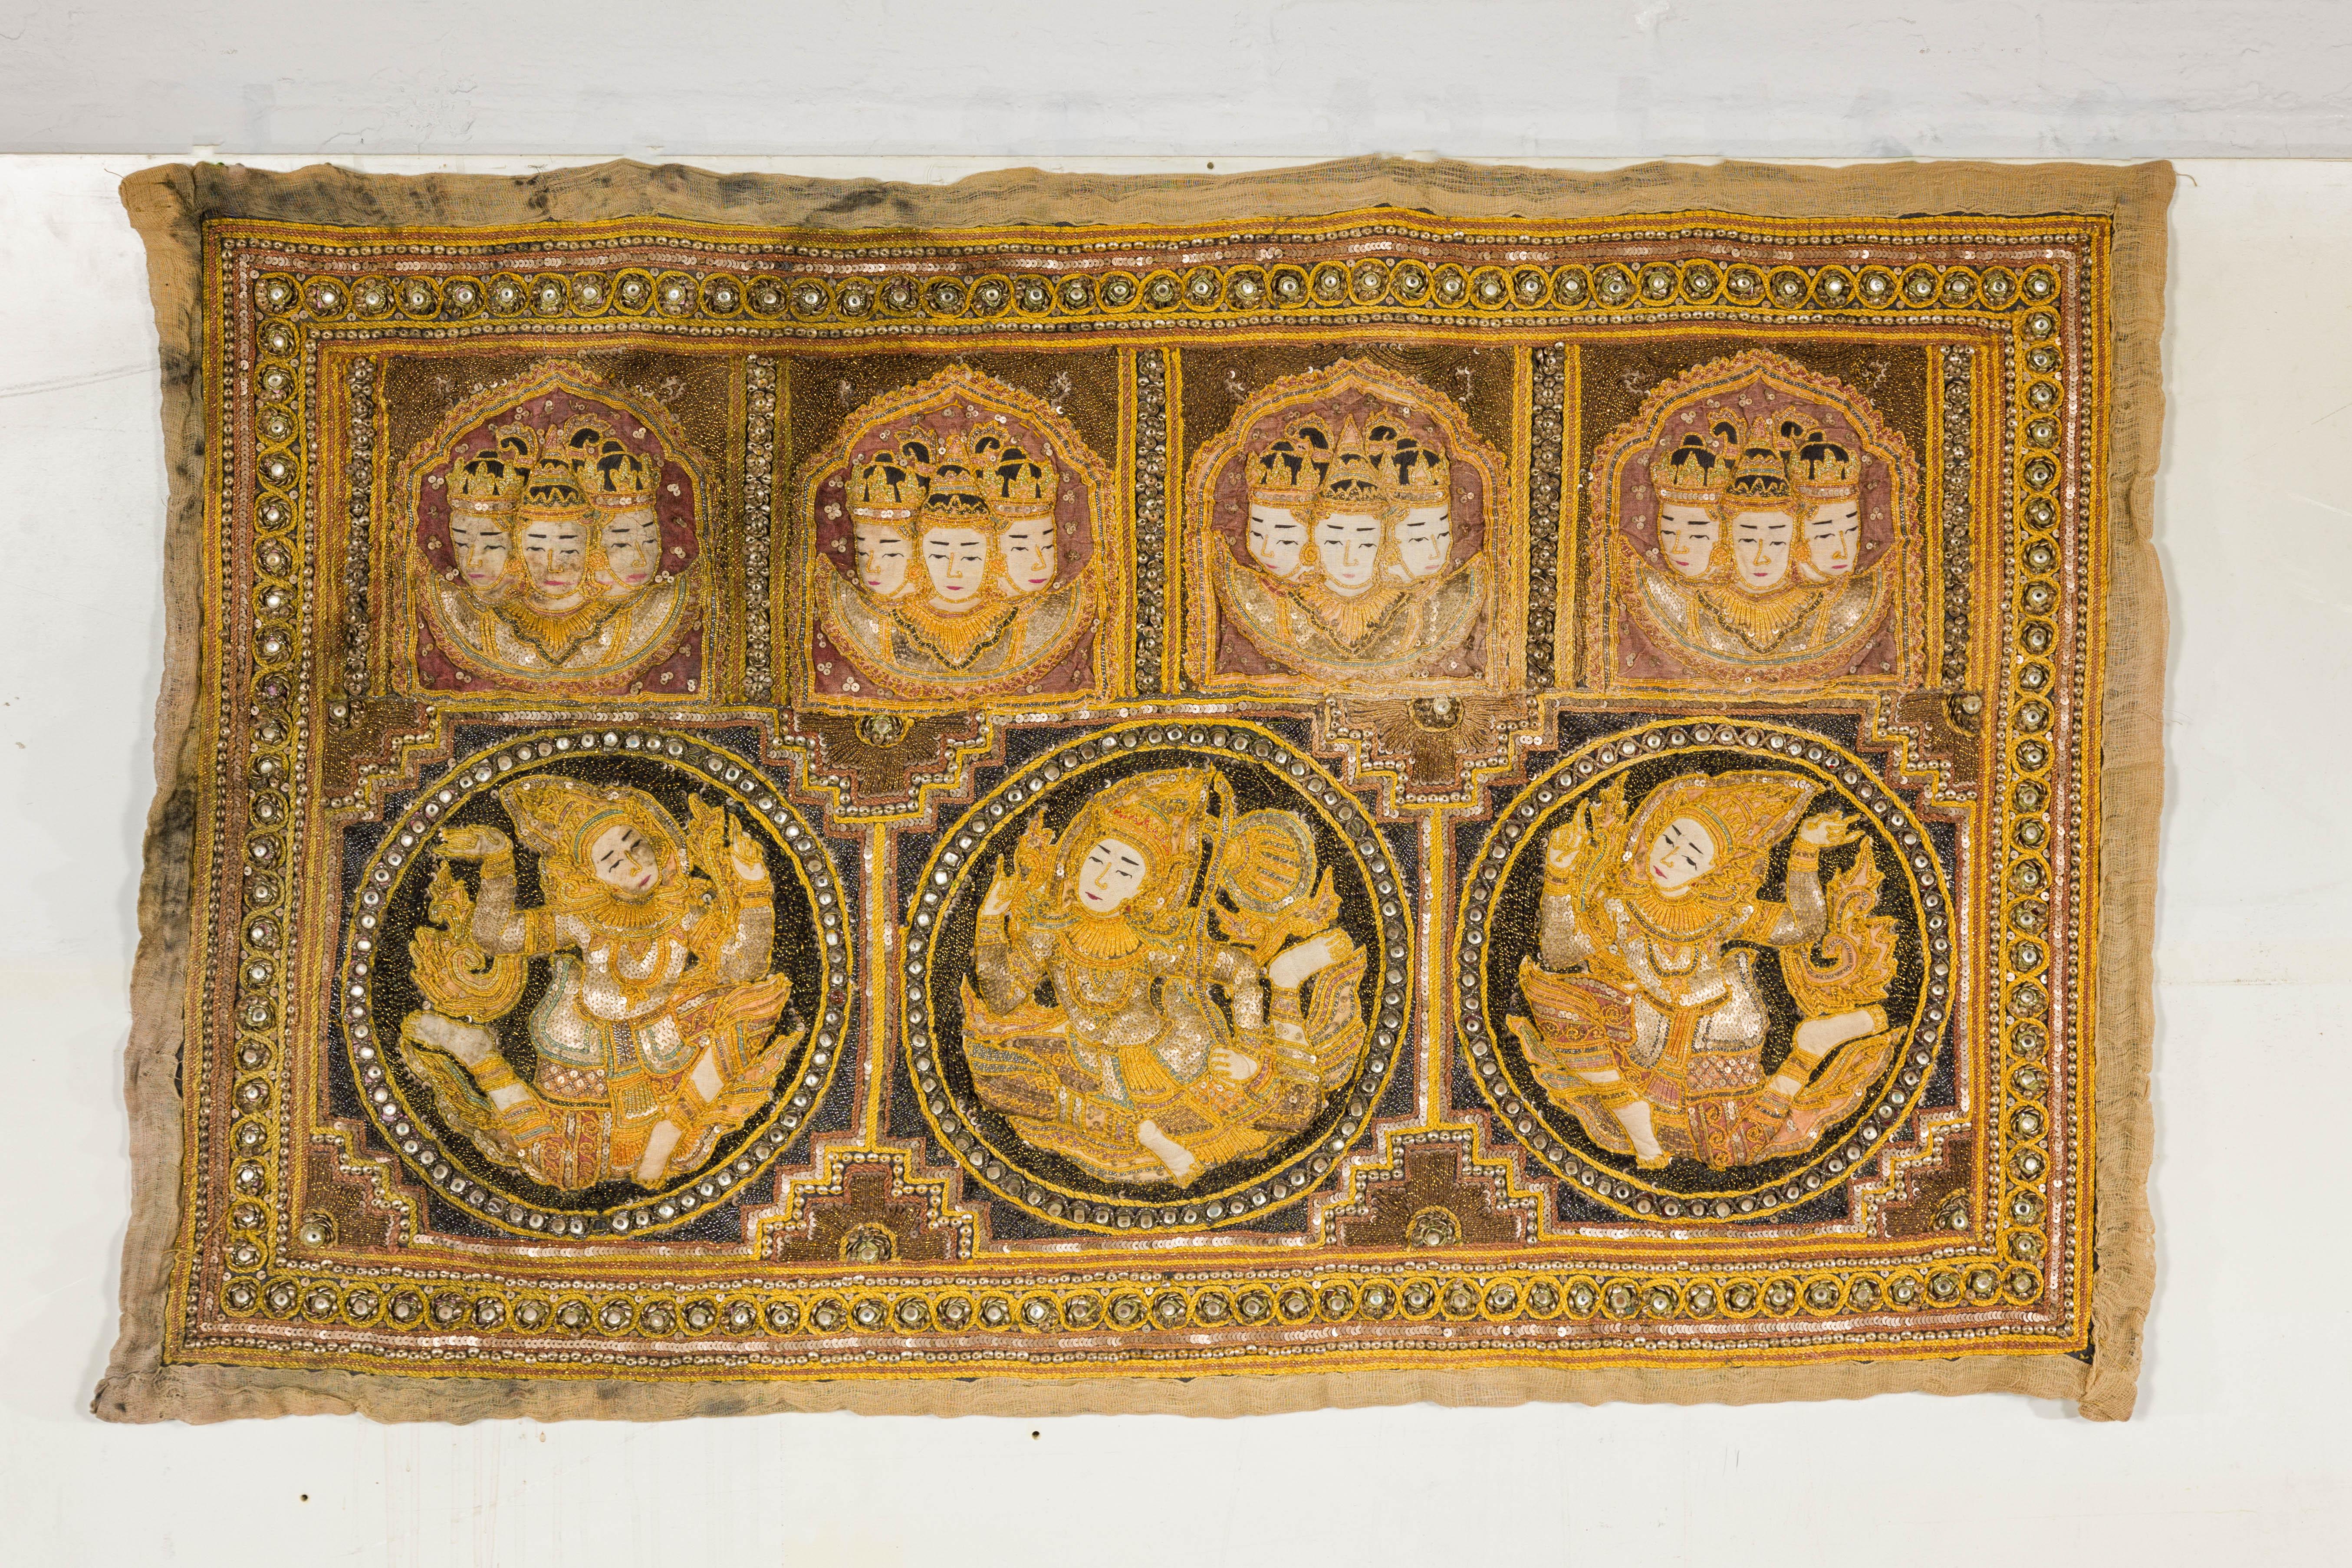 A 19th century Burmese Kalaga tapestry with stones, sequins and golden thread. This 19th-century Burmese Kalaga tapestry is a breathtaking piece of cultural heritage, featuring an ornate display of stones, sequins, and golden threads. Crafted in